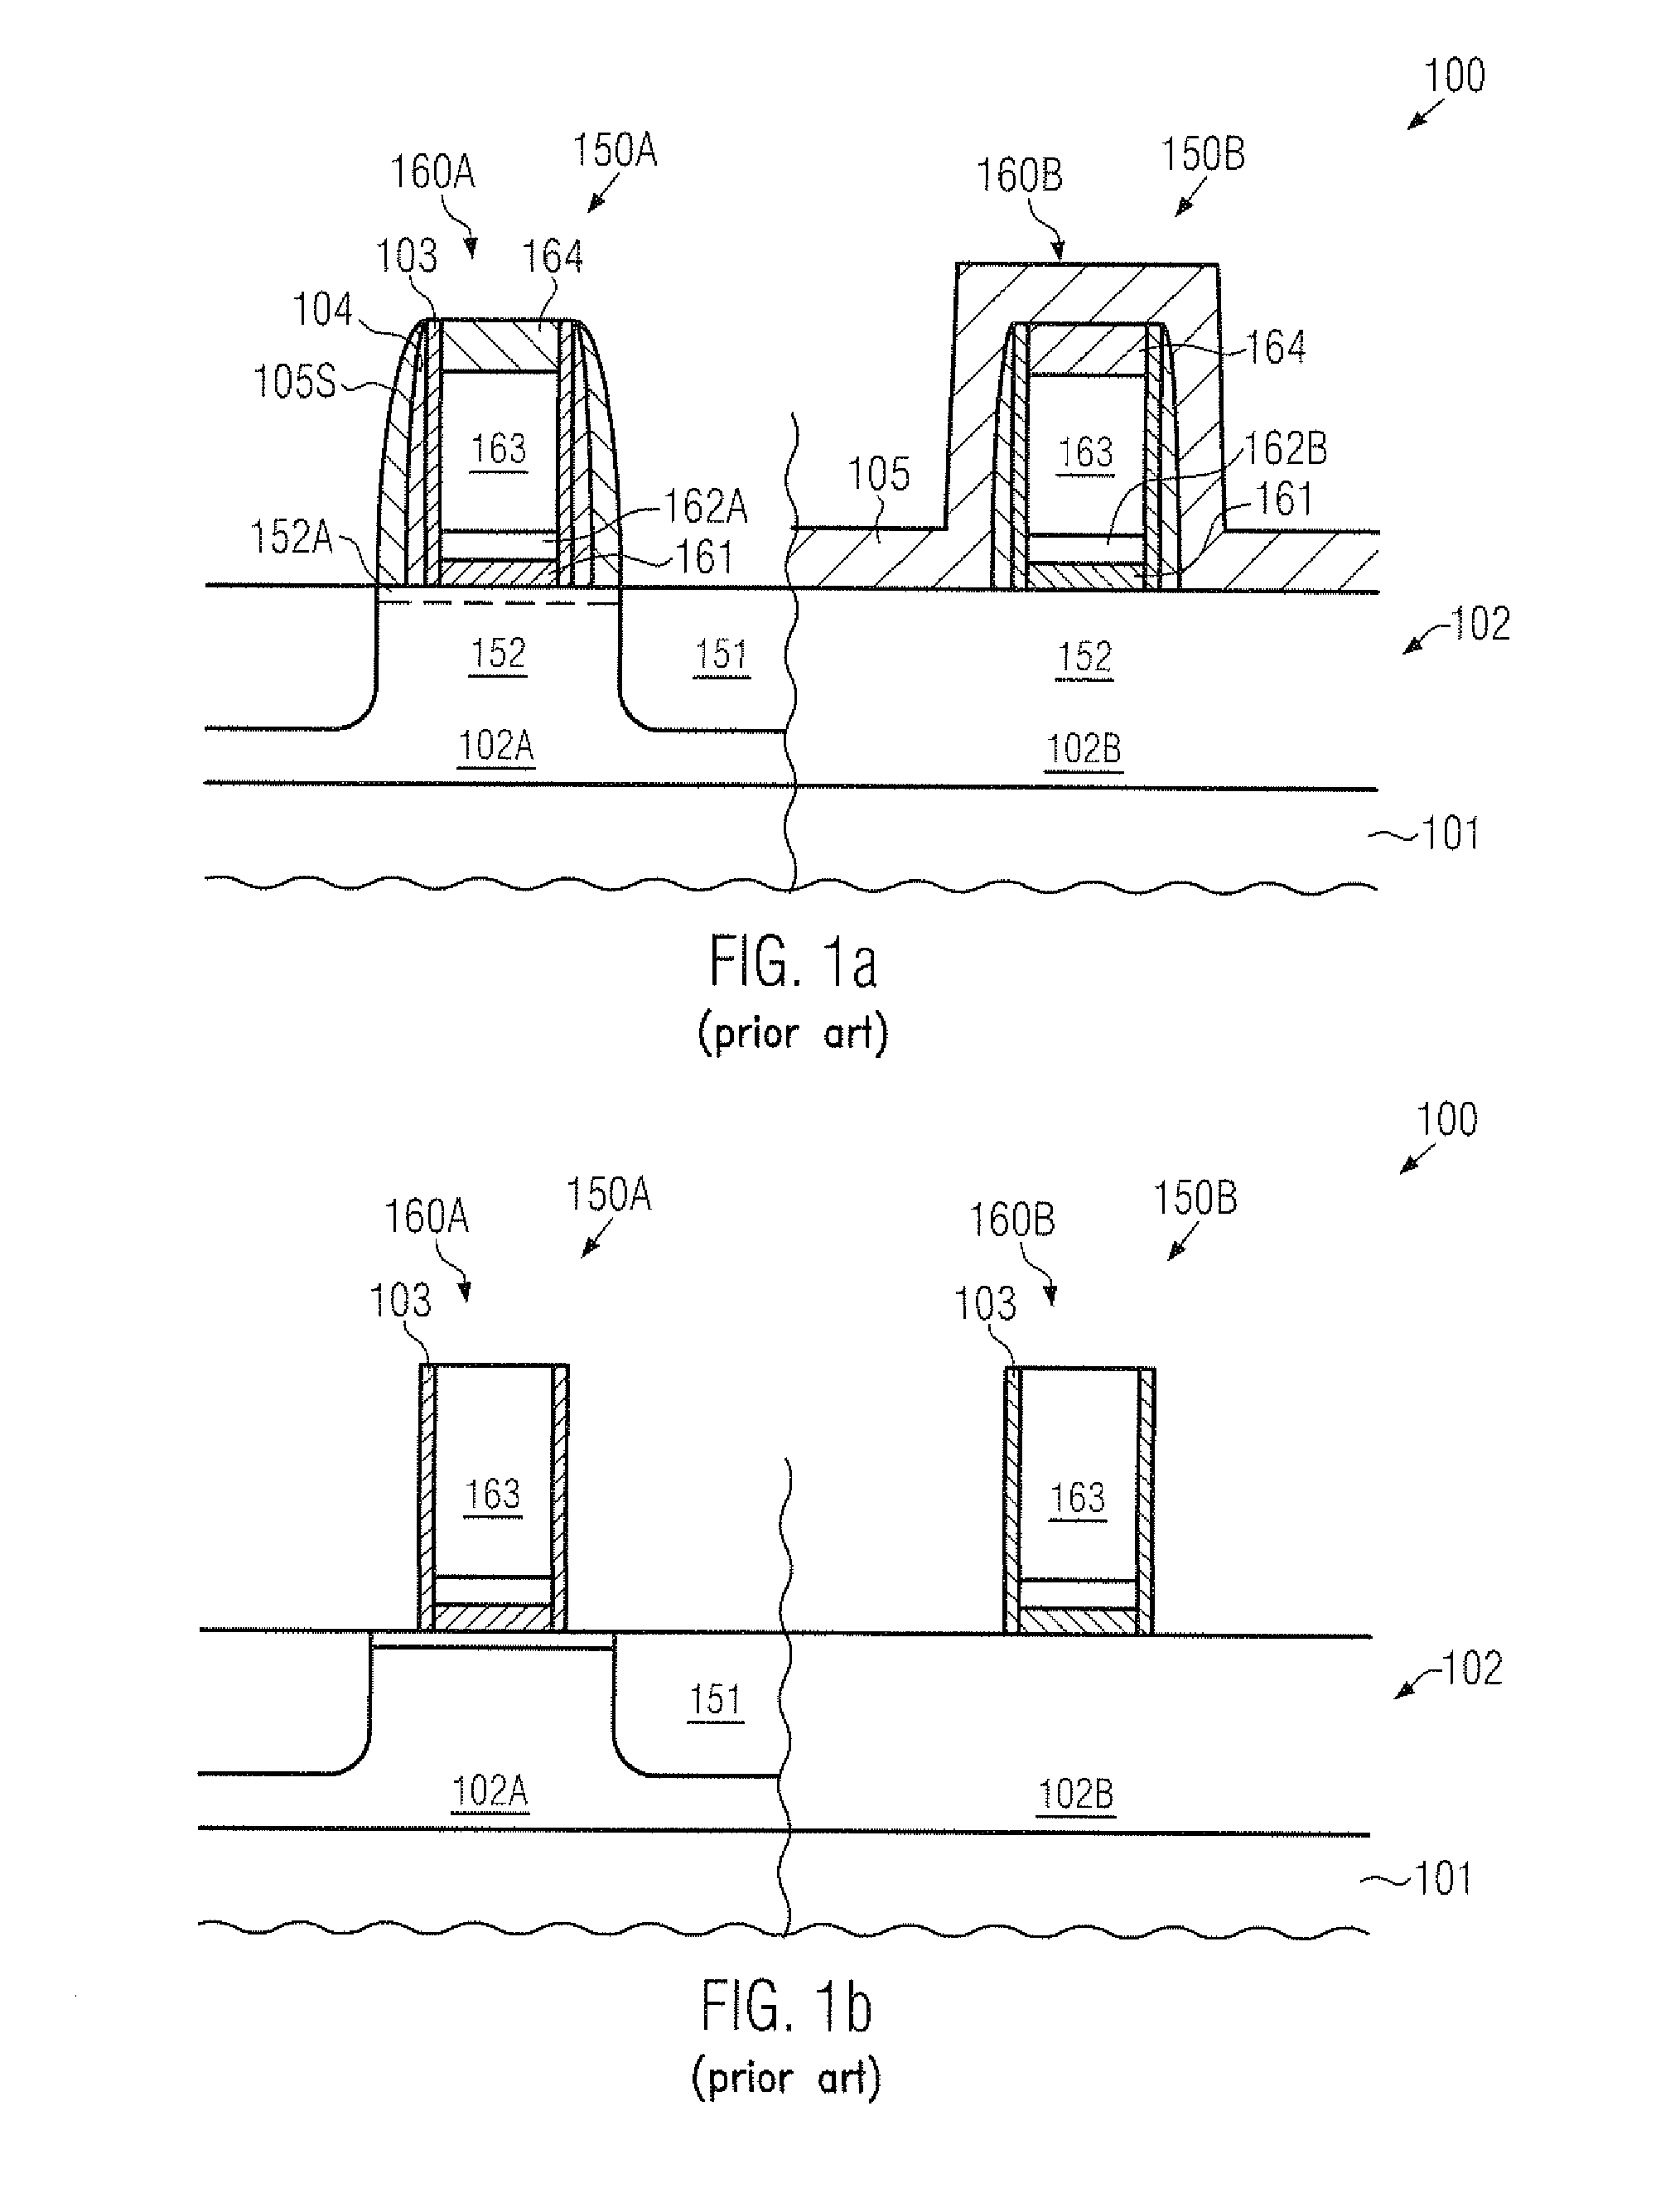 Performance enhancement in transistors comprising high-k metal gate stack by reducing a width of offset spacers